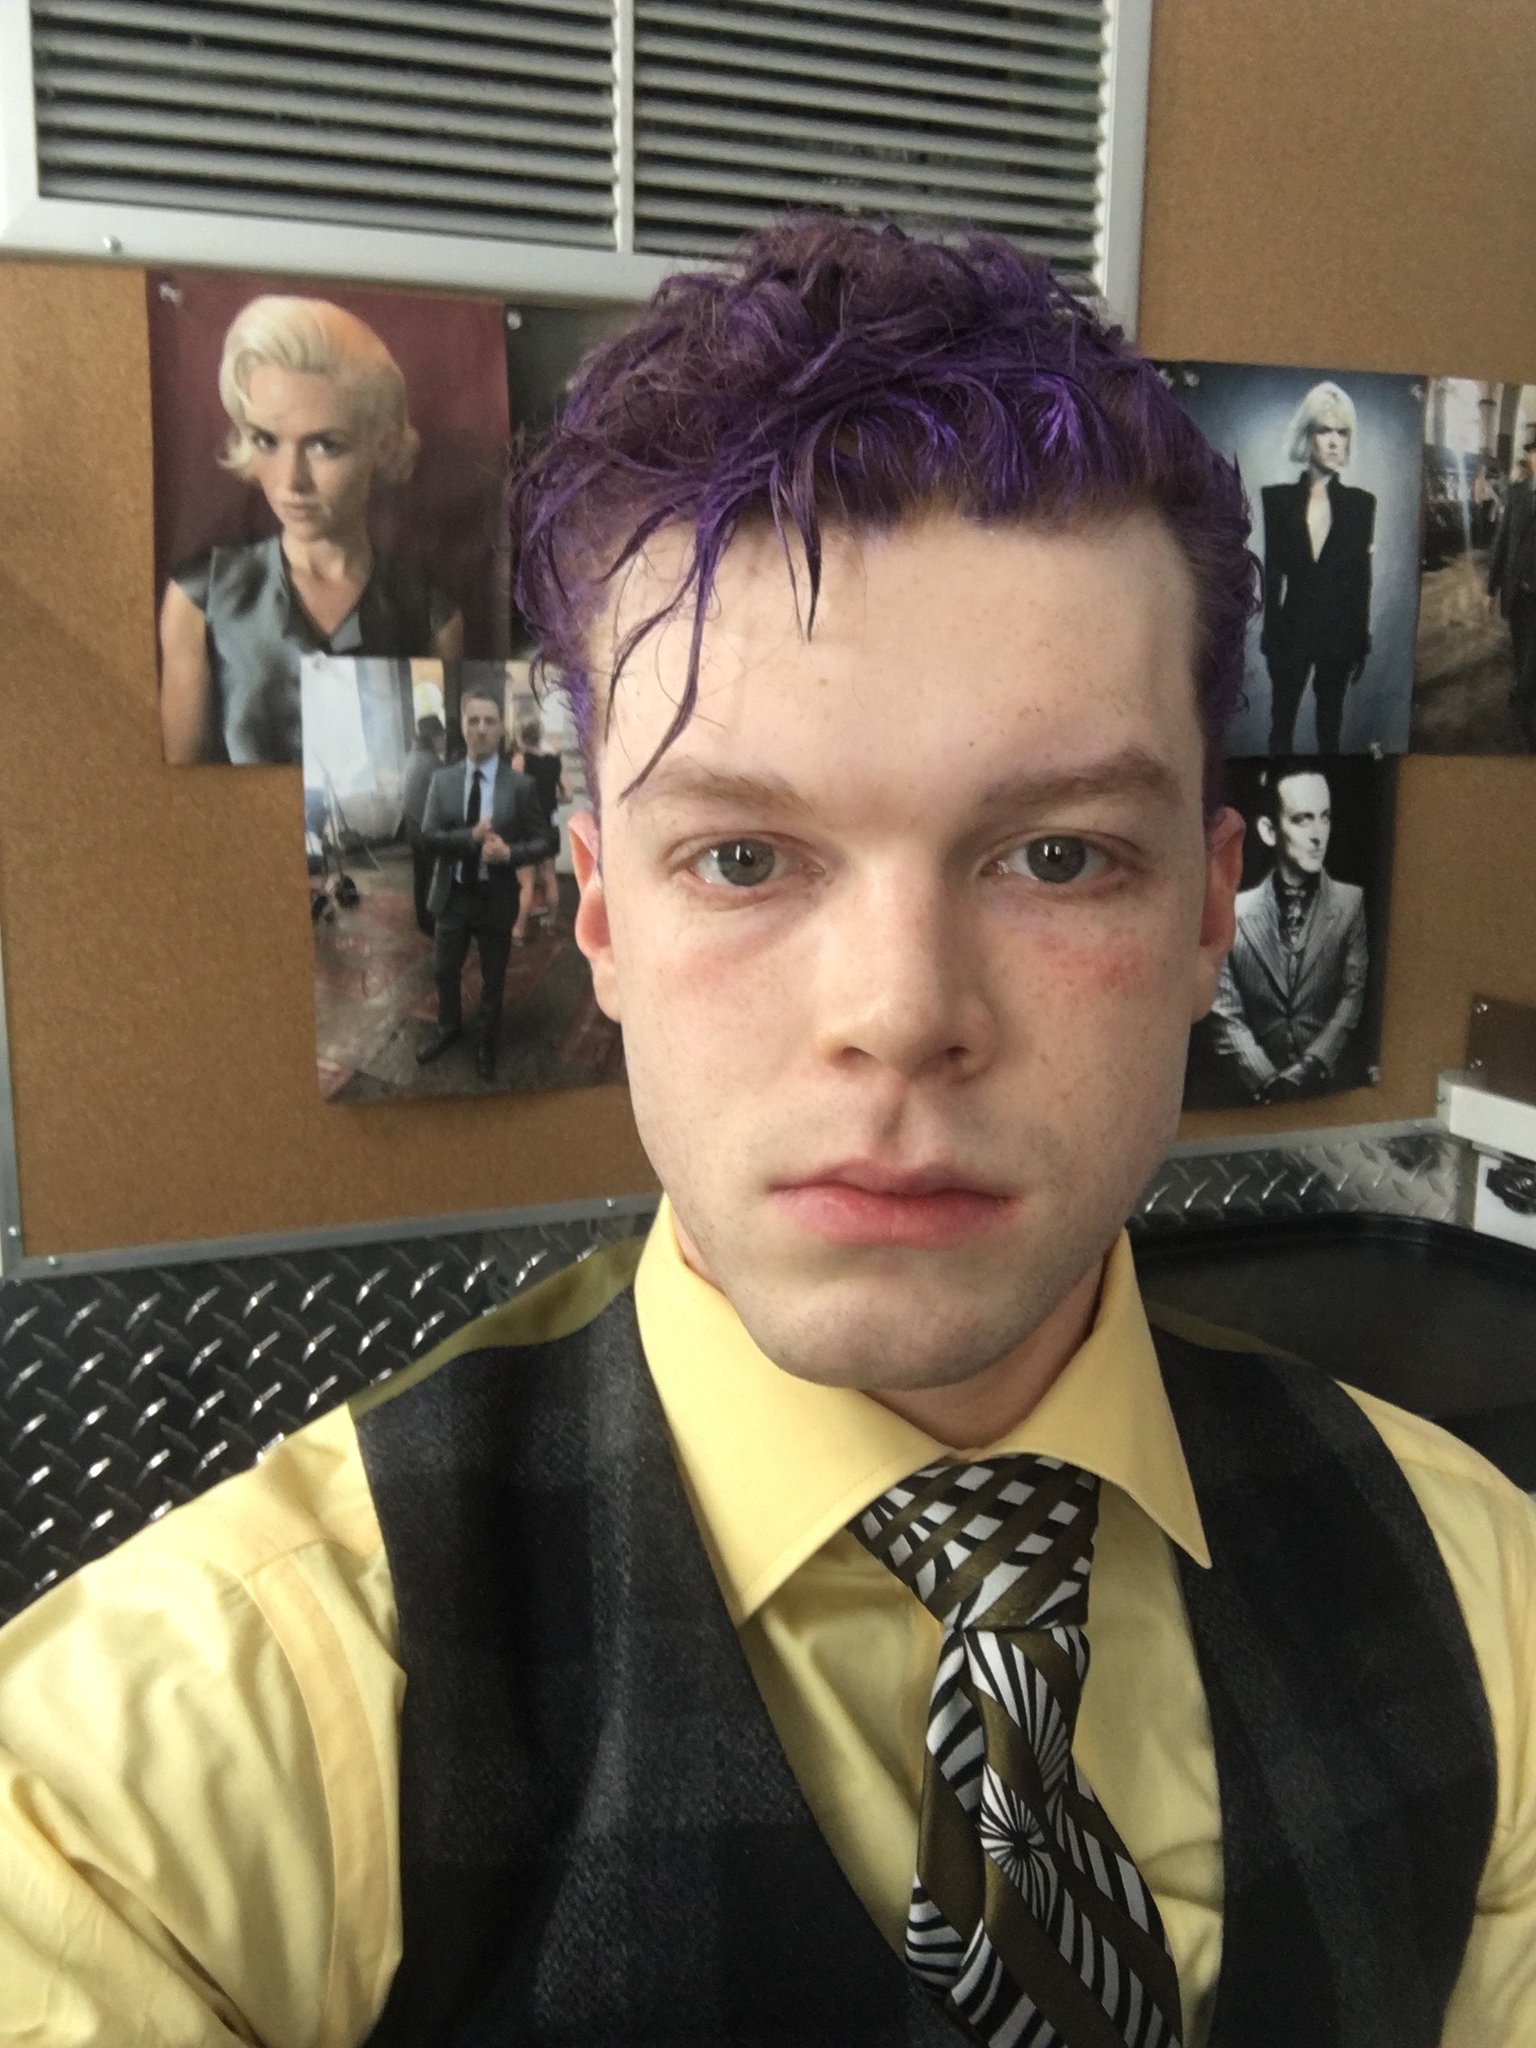 Cameron Monaghan on Twitter: "Various hair tests. Pure 